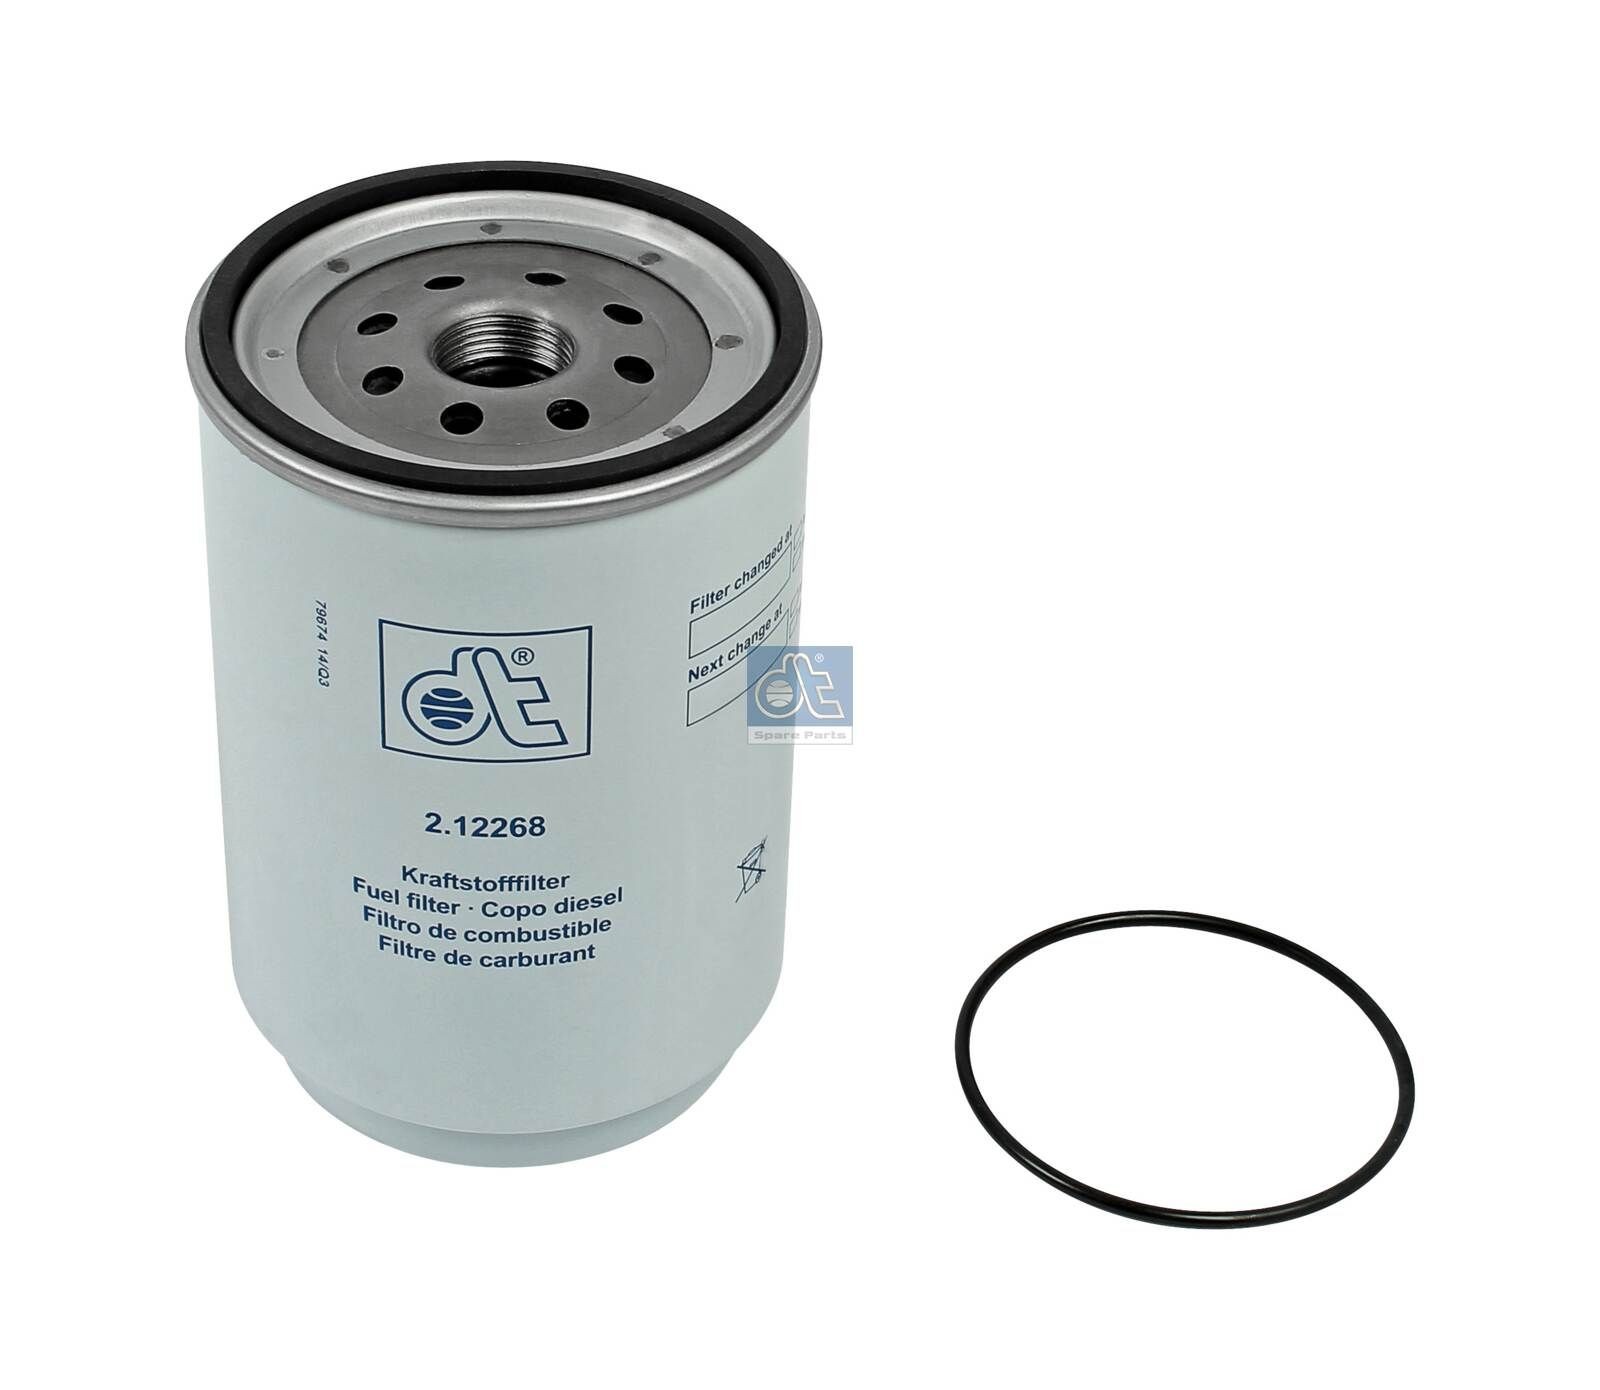 WK 11 001 x DT Spare Parts 2.12268 Fuel filter 1533870